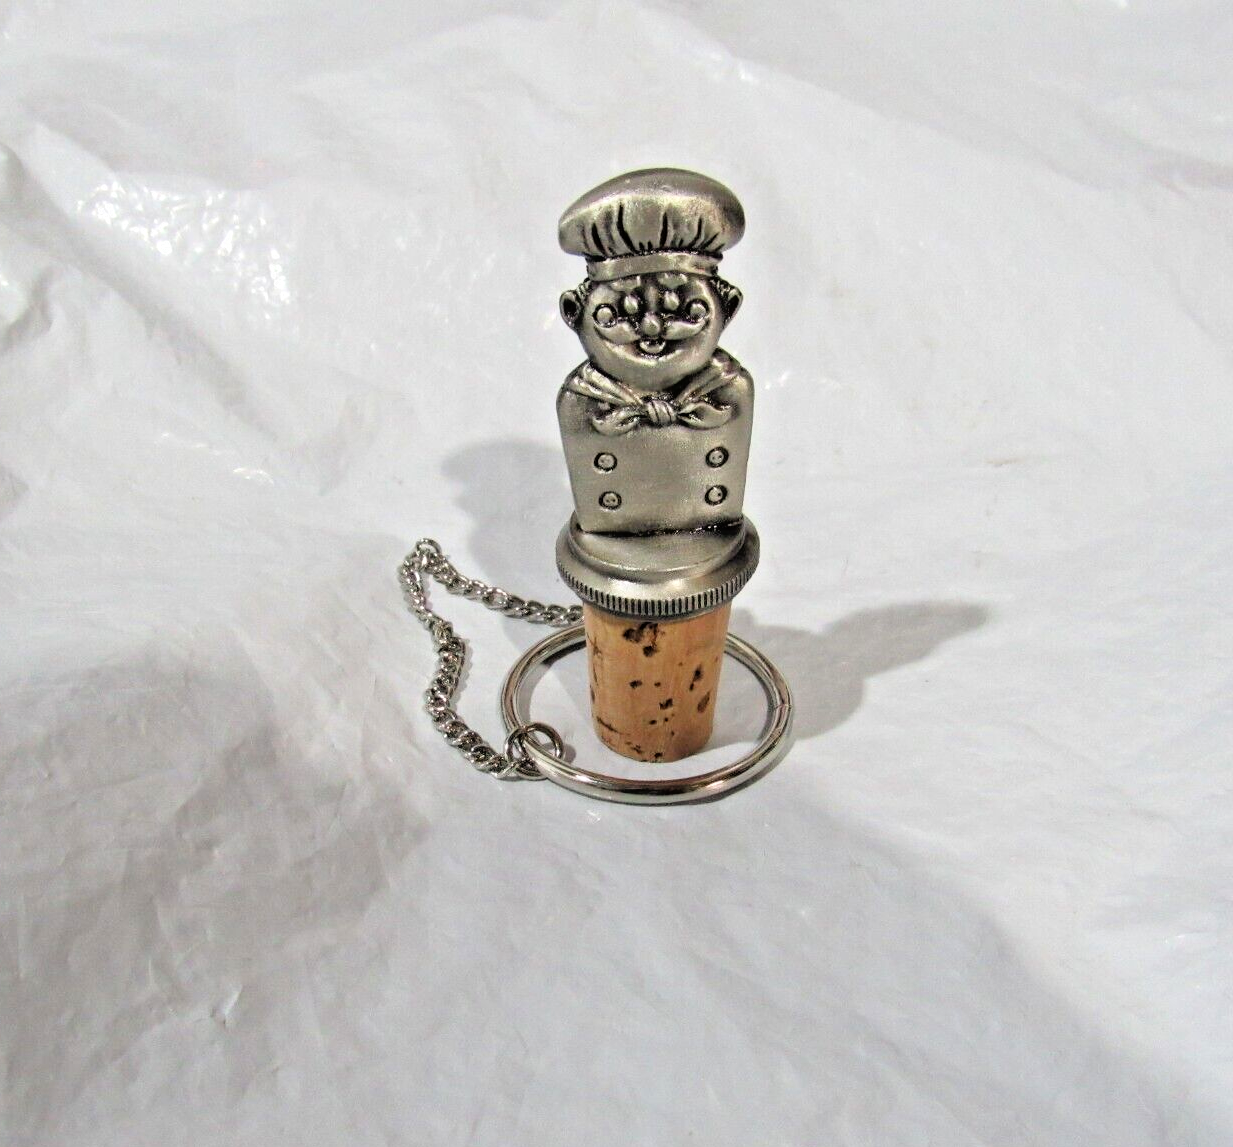 Primary image for Solid Pewter Chef w/Cork Wine Bottle Stopper w/Chain & Ring by Chenco